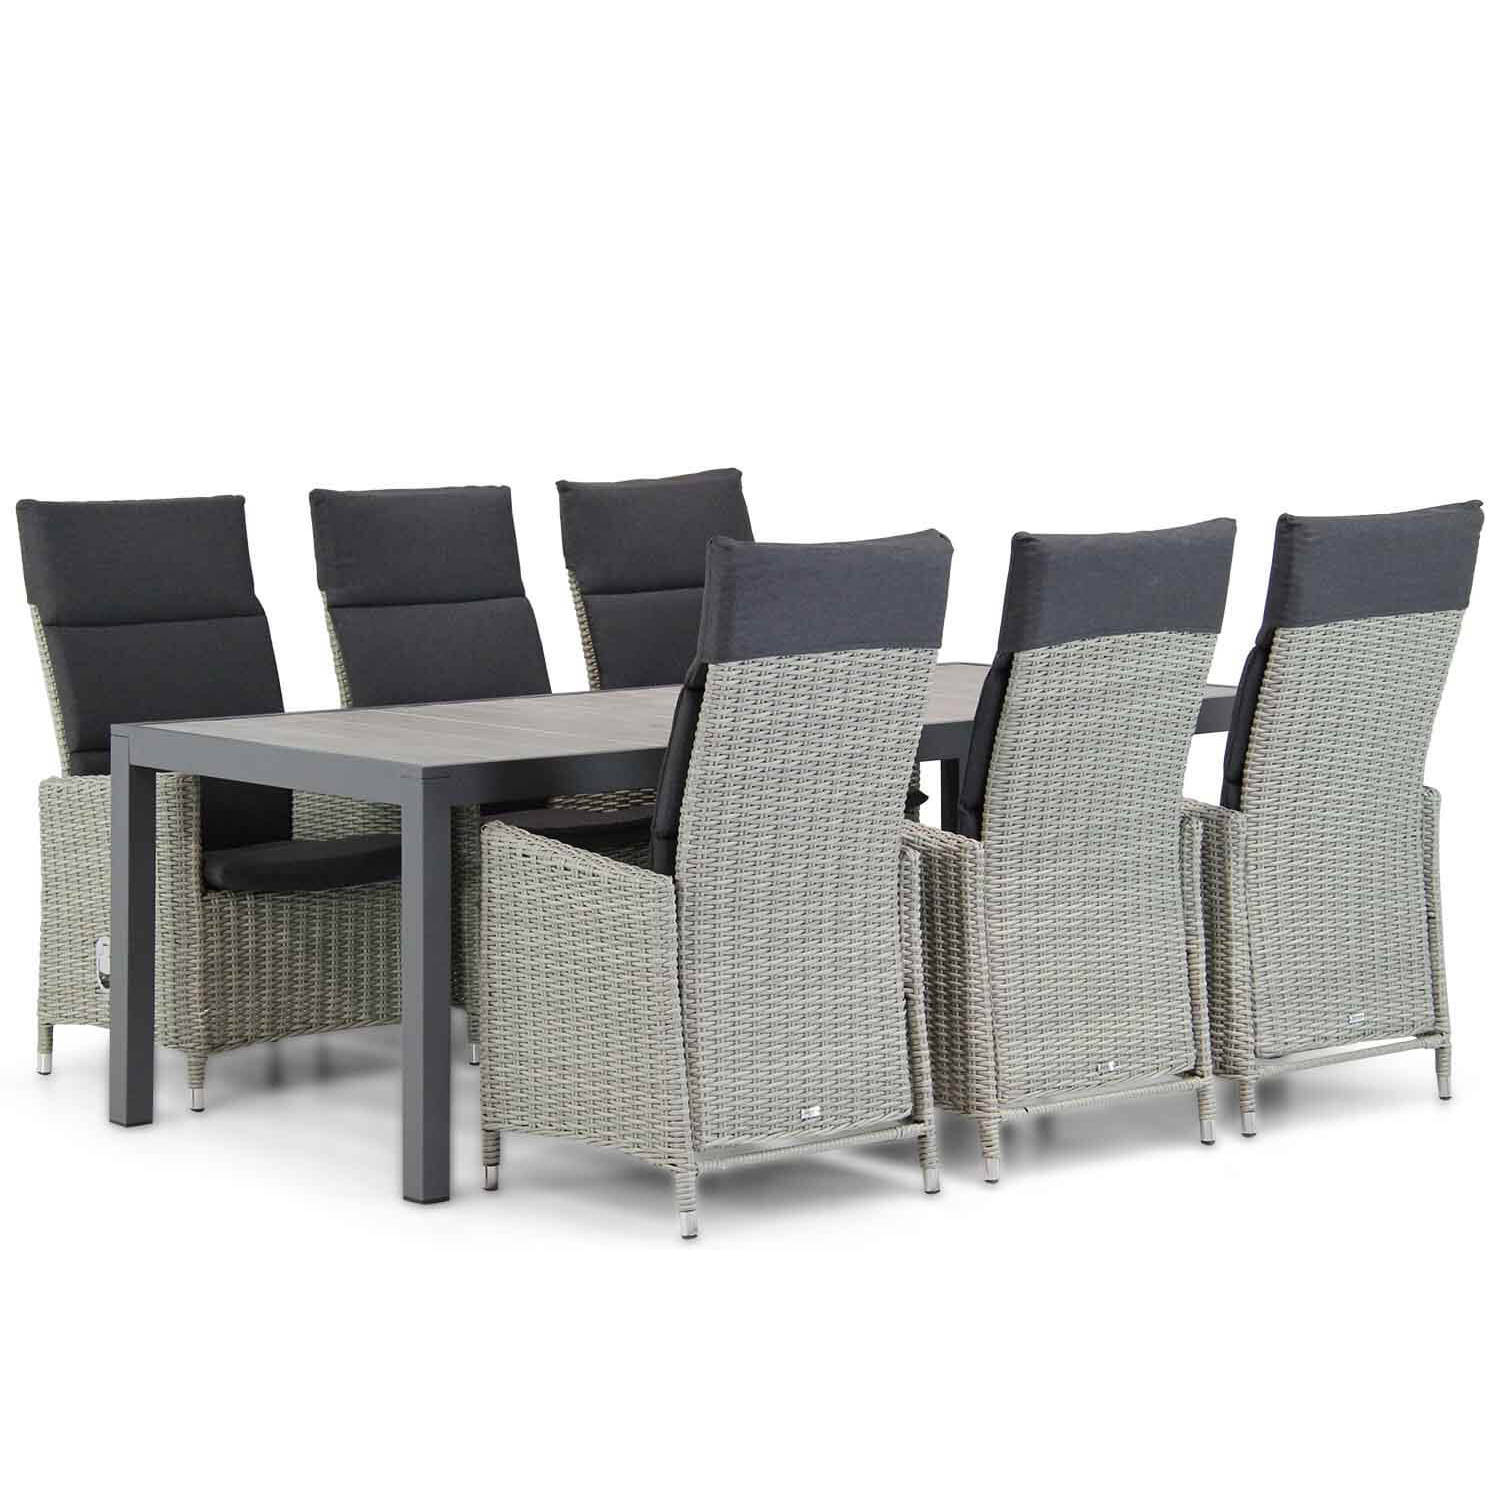 Blokker Tuinsets - Garden Collections Madera/Residence 220 cm dining tuinset 7-delig aanbieding